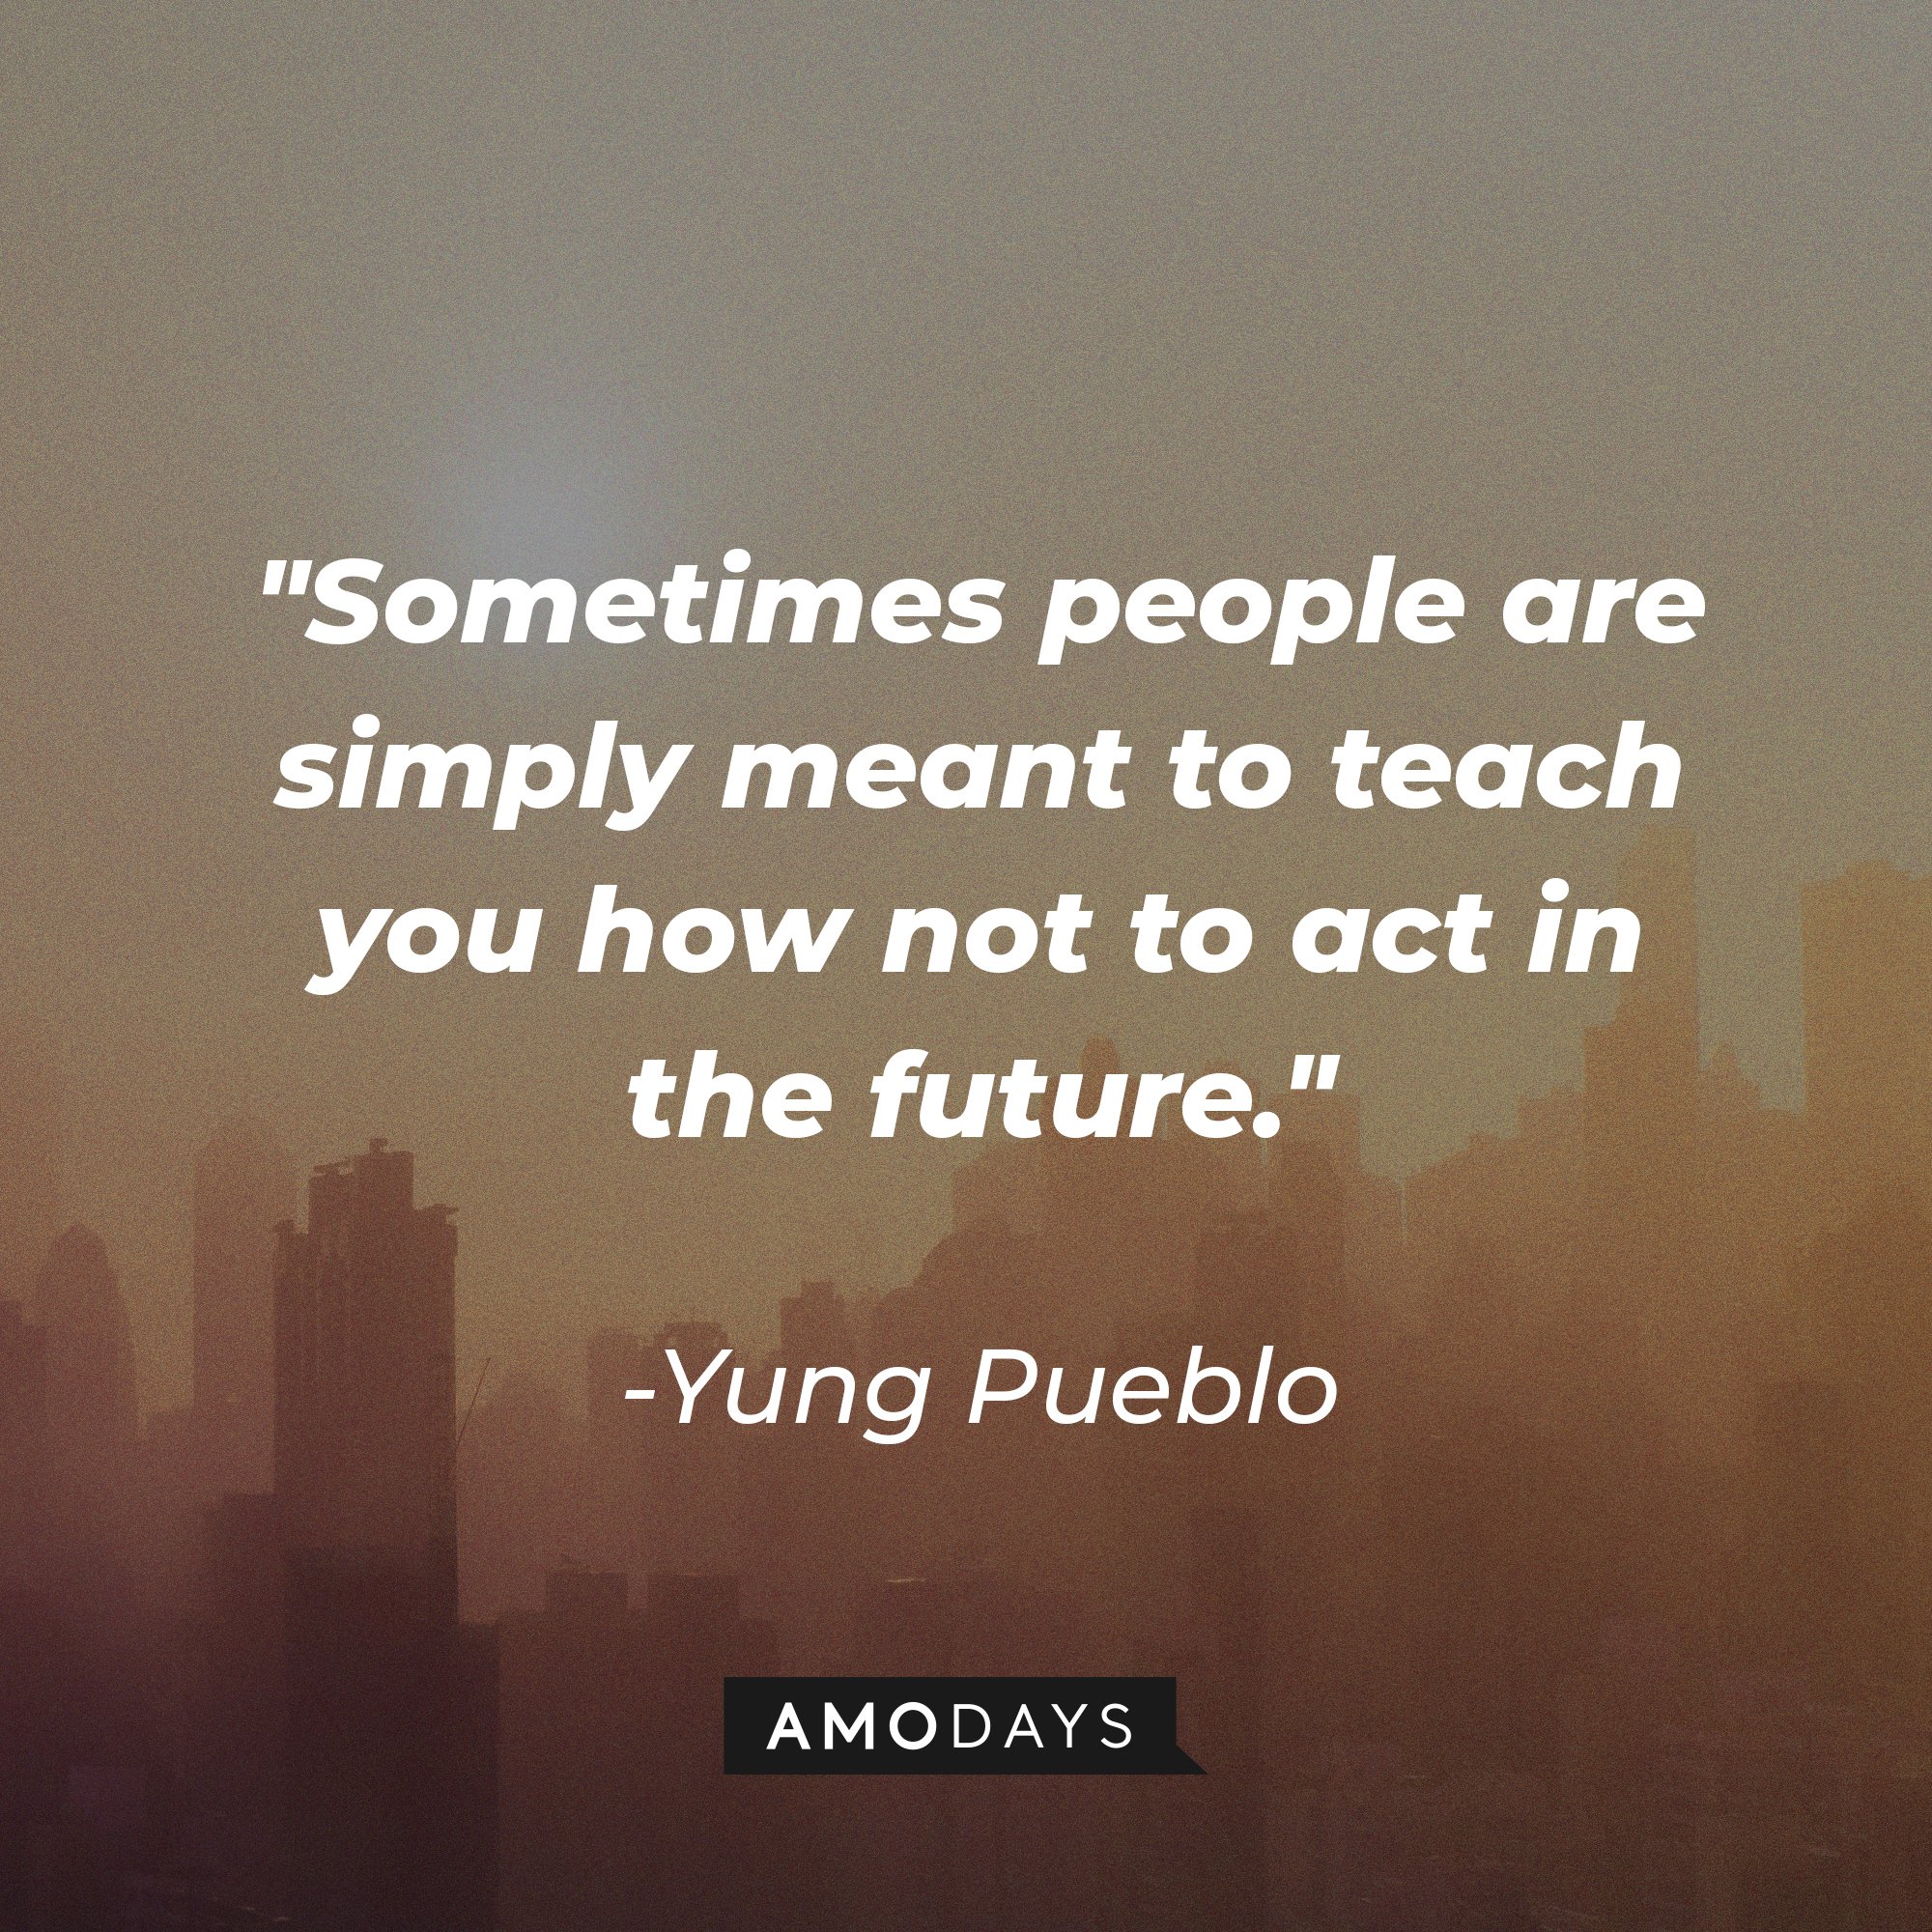 Yung Pueblo's quote "Sometimes people are simply meant to teach you how not to act in the future." | Source: Unsplash.com